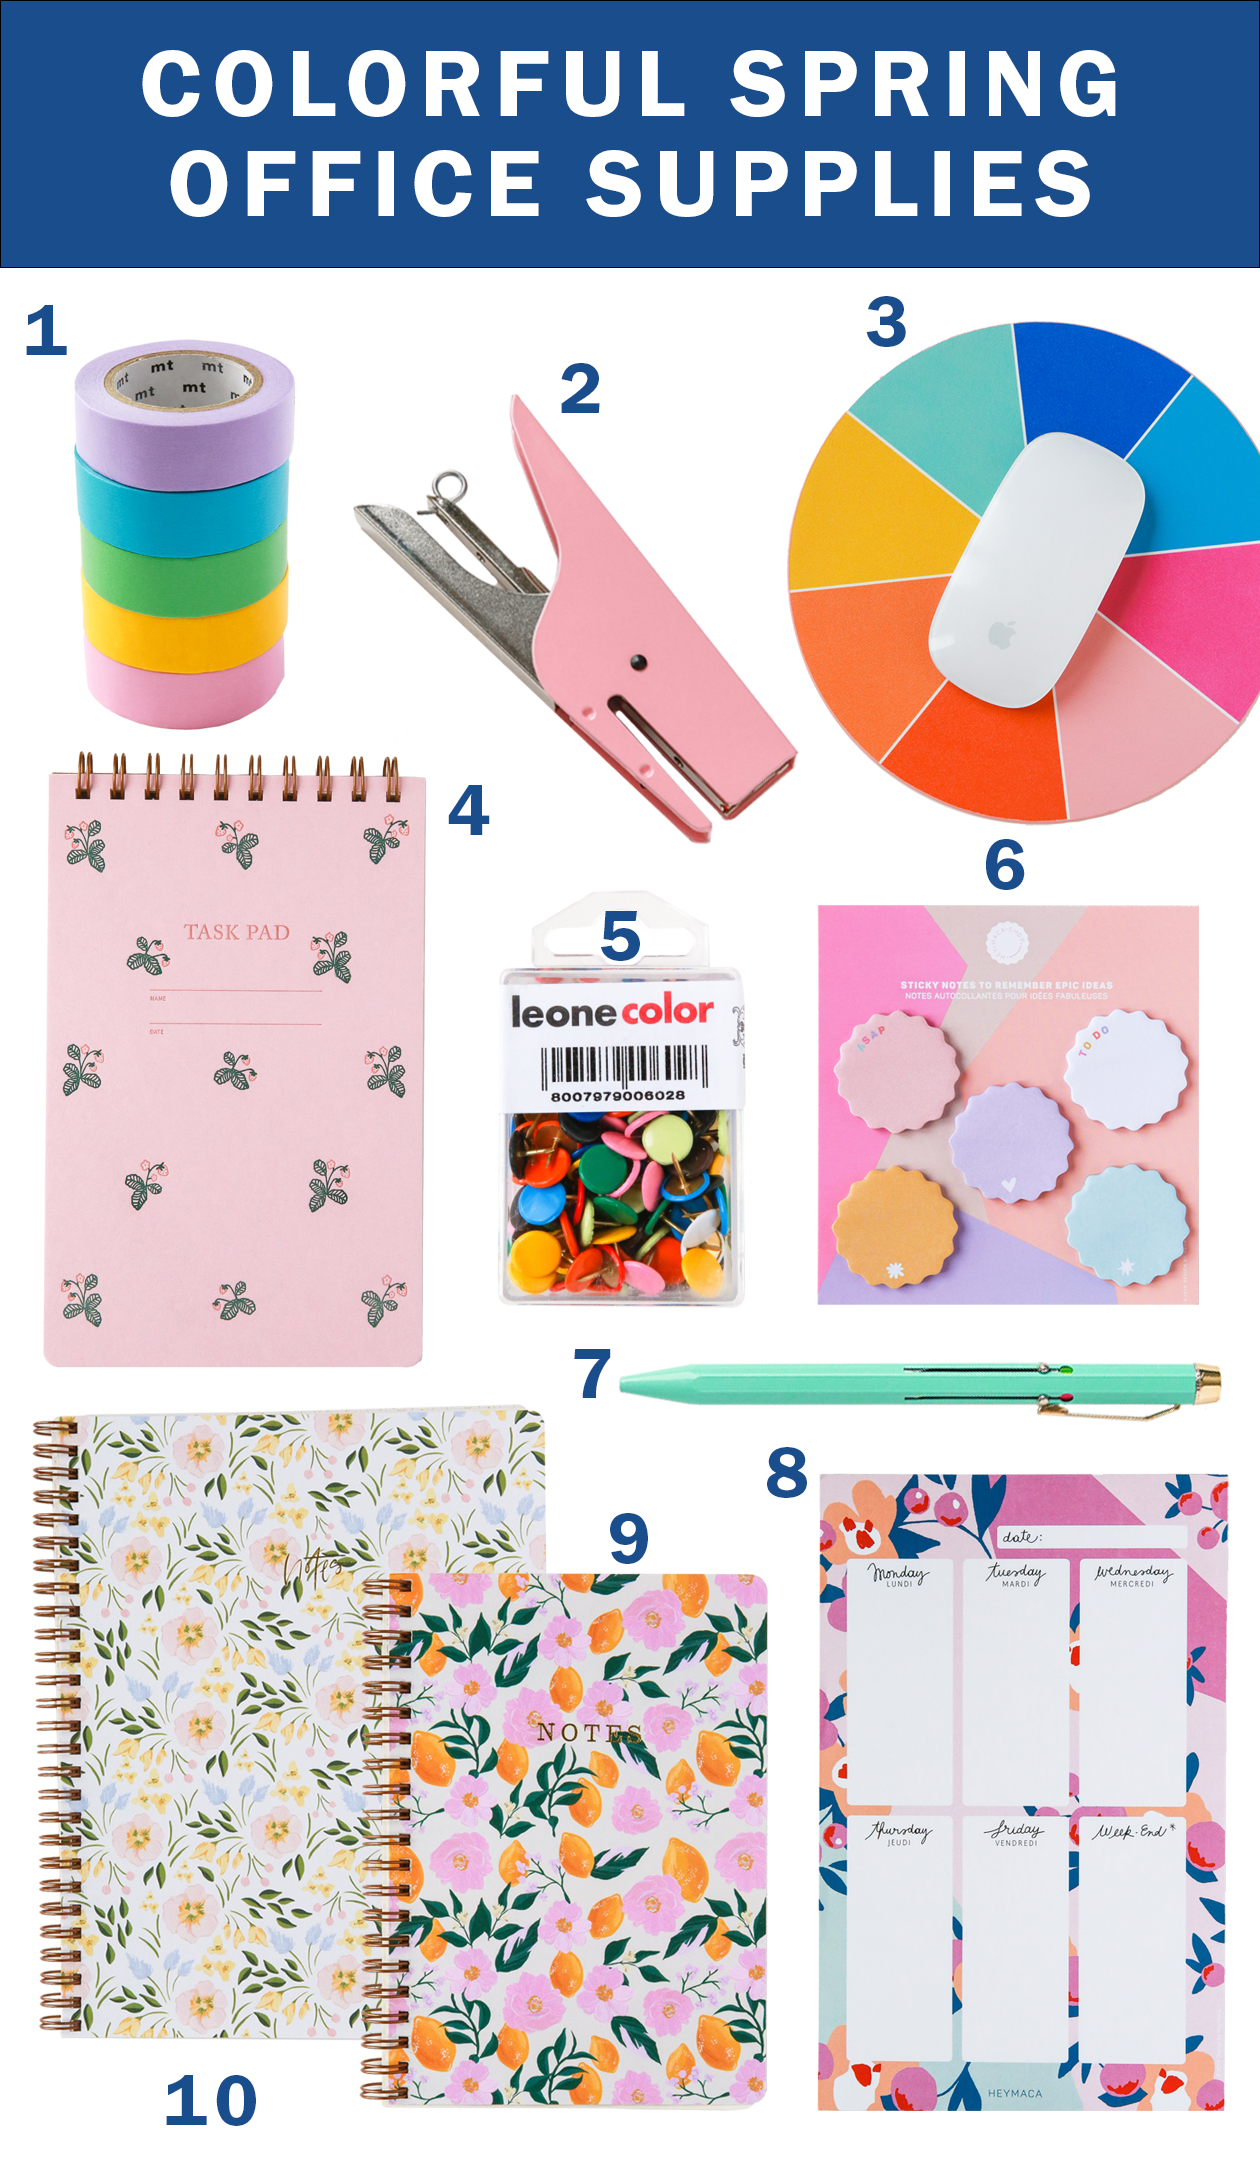 Colorful Spring Office Supplies